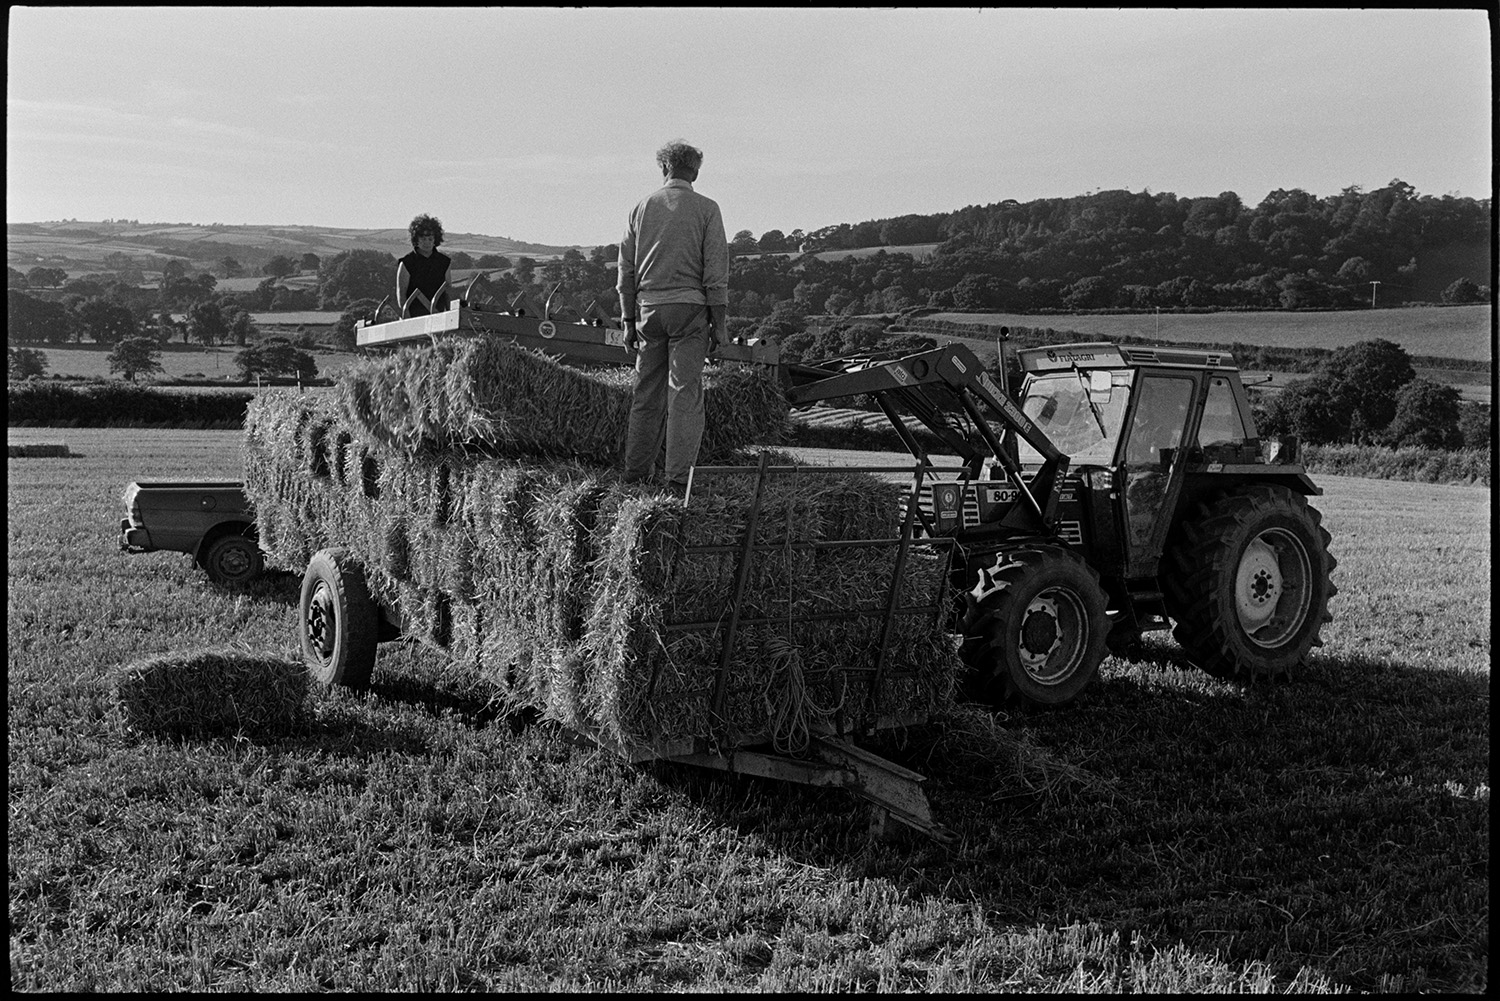 Loading bales of straw.
[A man and woman standing on bales of straw on a trailer while bales are loaded onto the trailer by a tractor, in a field at Rashleigh Barton, Chulmleigh.]